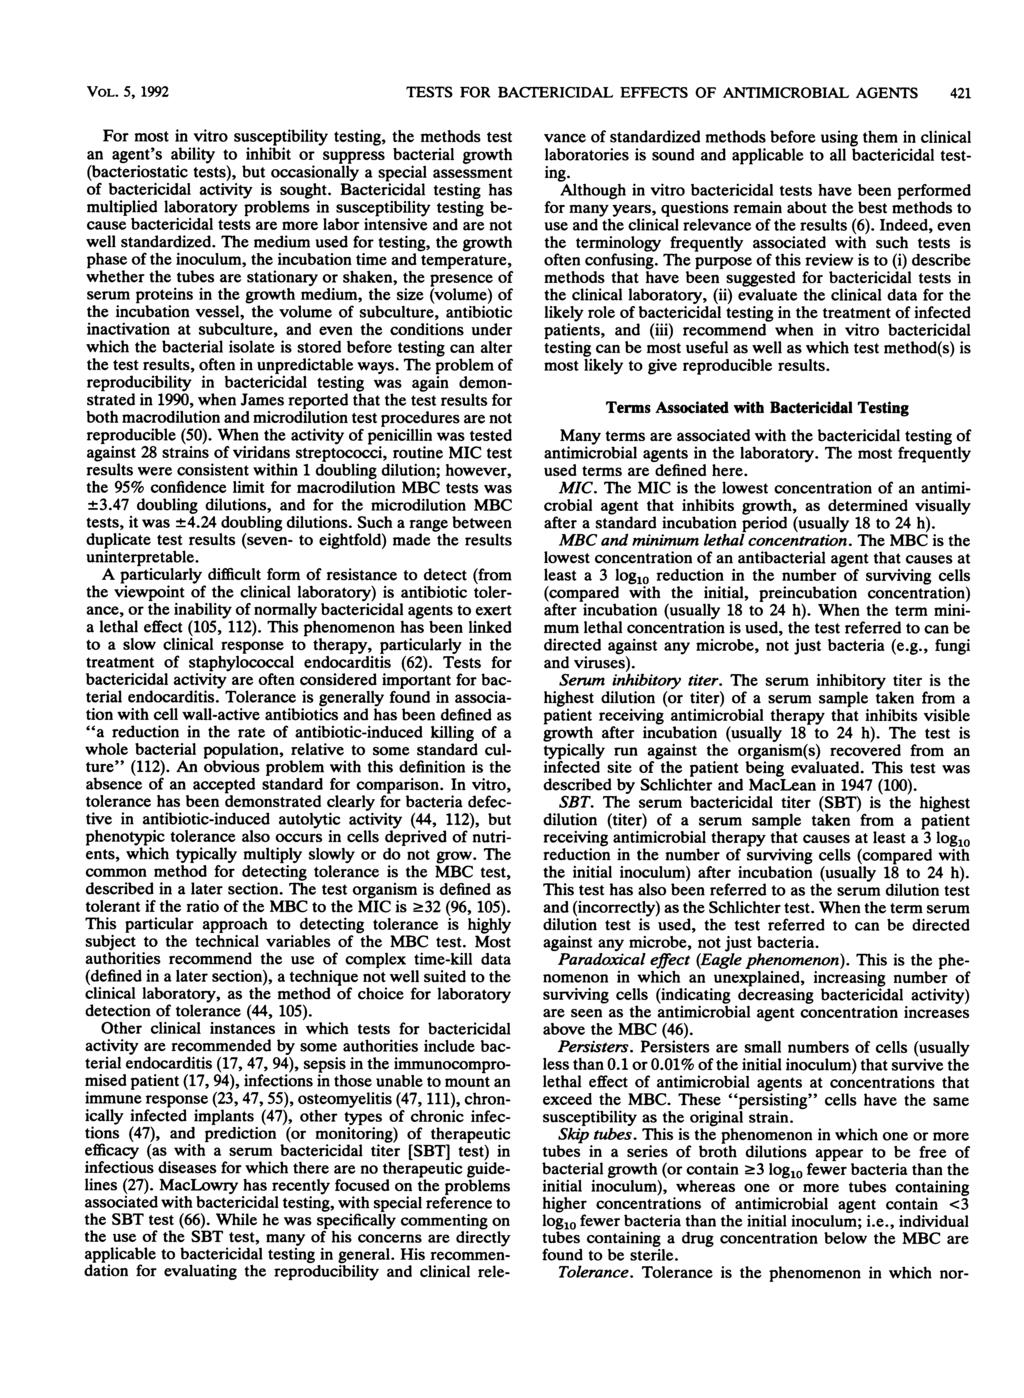 VOL. 5, 1992 TESTS FOR BACTERICIDAL EFFECTS OF ANTIMICROBIAL AGENTS 421 For most in vitro susceptibility testing, the methods test an agent's ability to inhibit or suppress bacterial growth